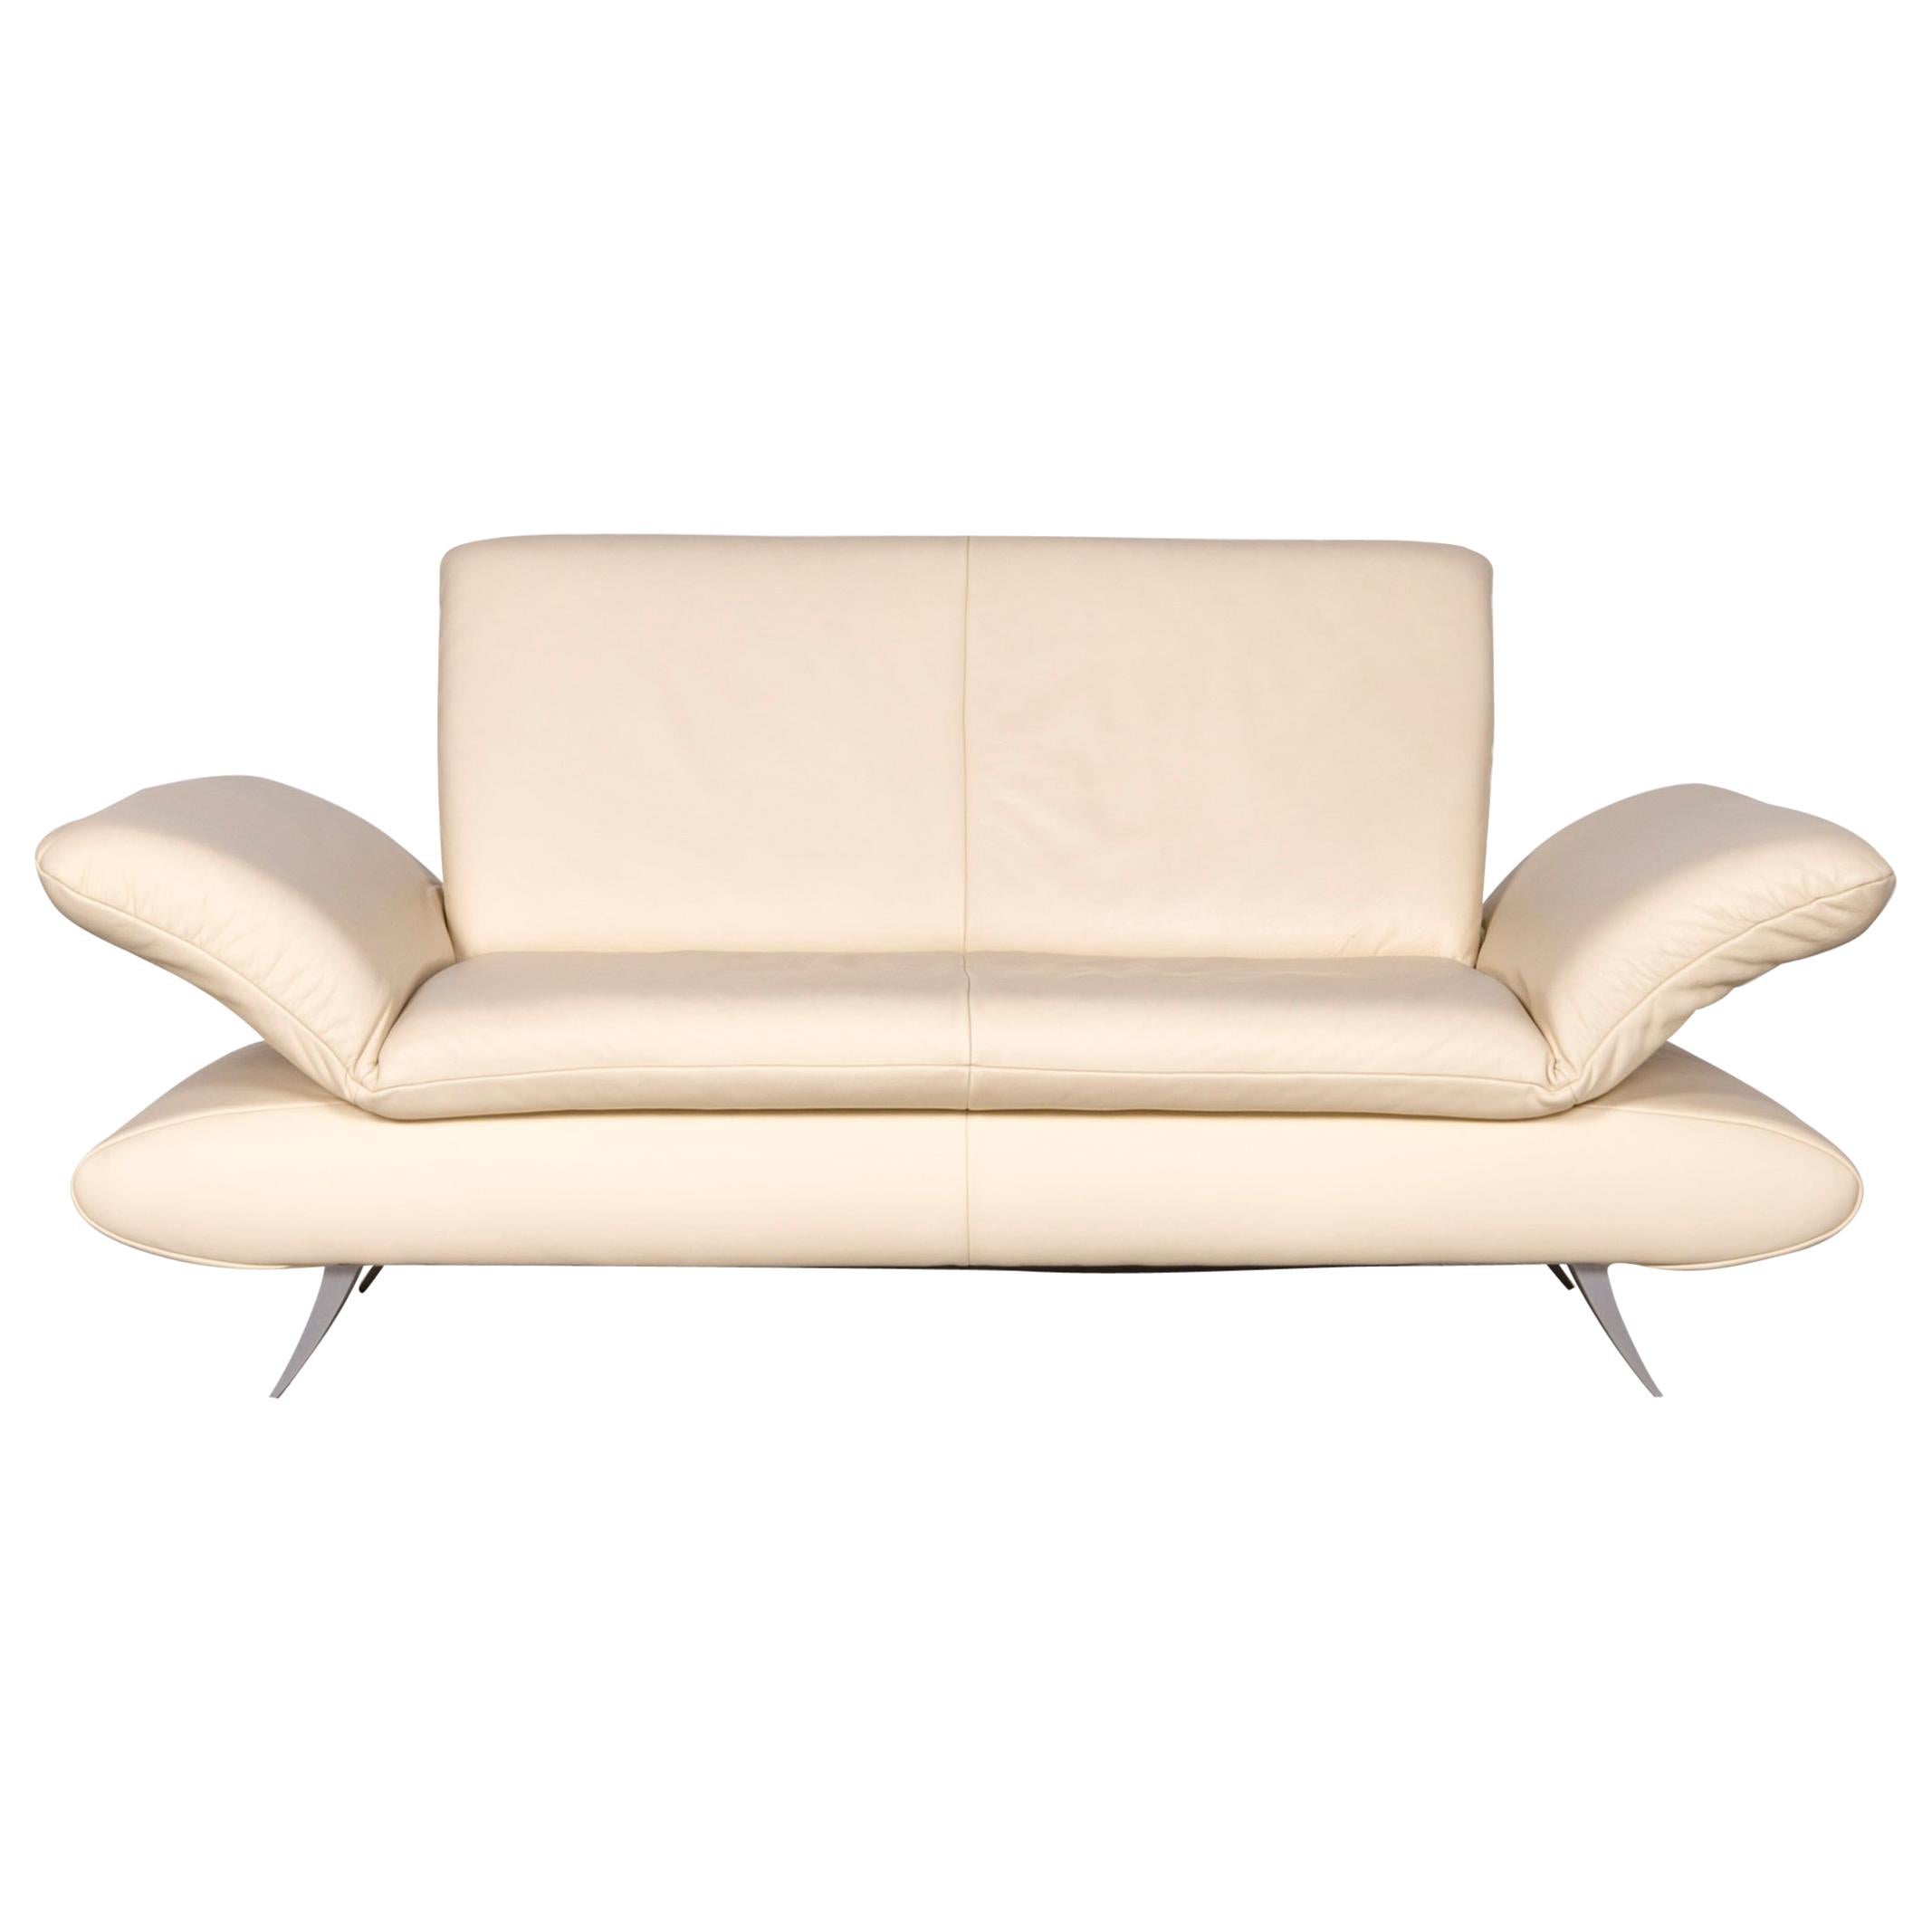 Koinor Rossini Designer Leather Sofa Creme Two-Seat Couch For Sale